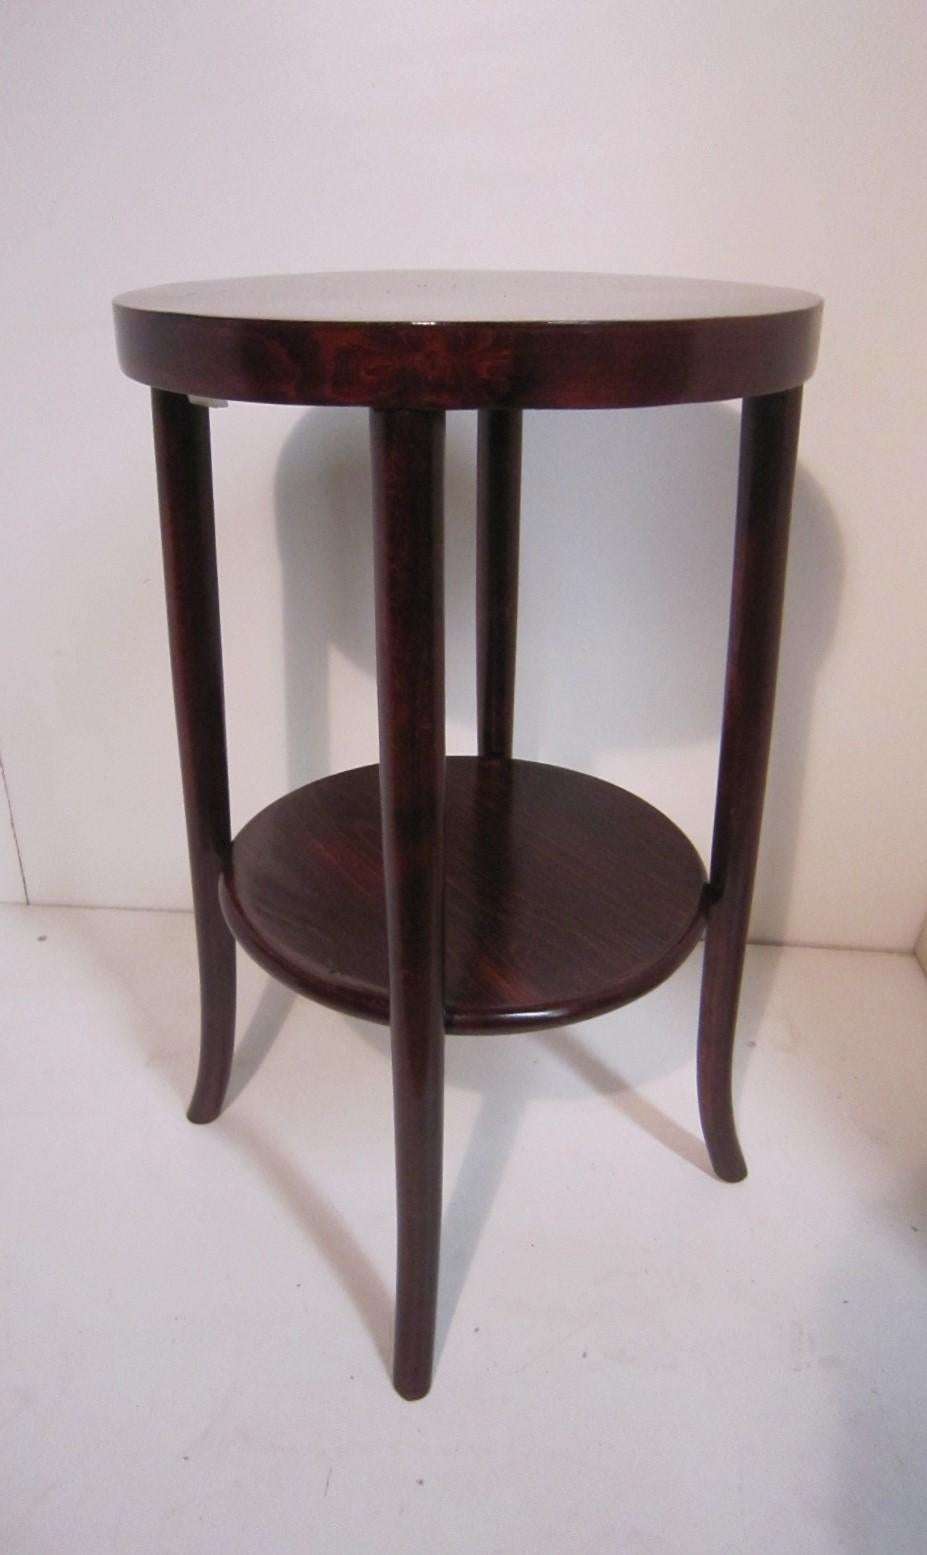 Original Austrian Small Round Bentwood Jungenstil Side Table with Oxblood Finish 8